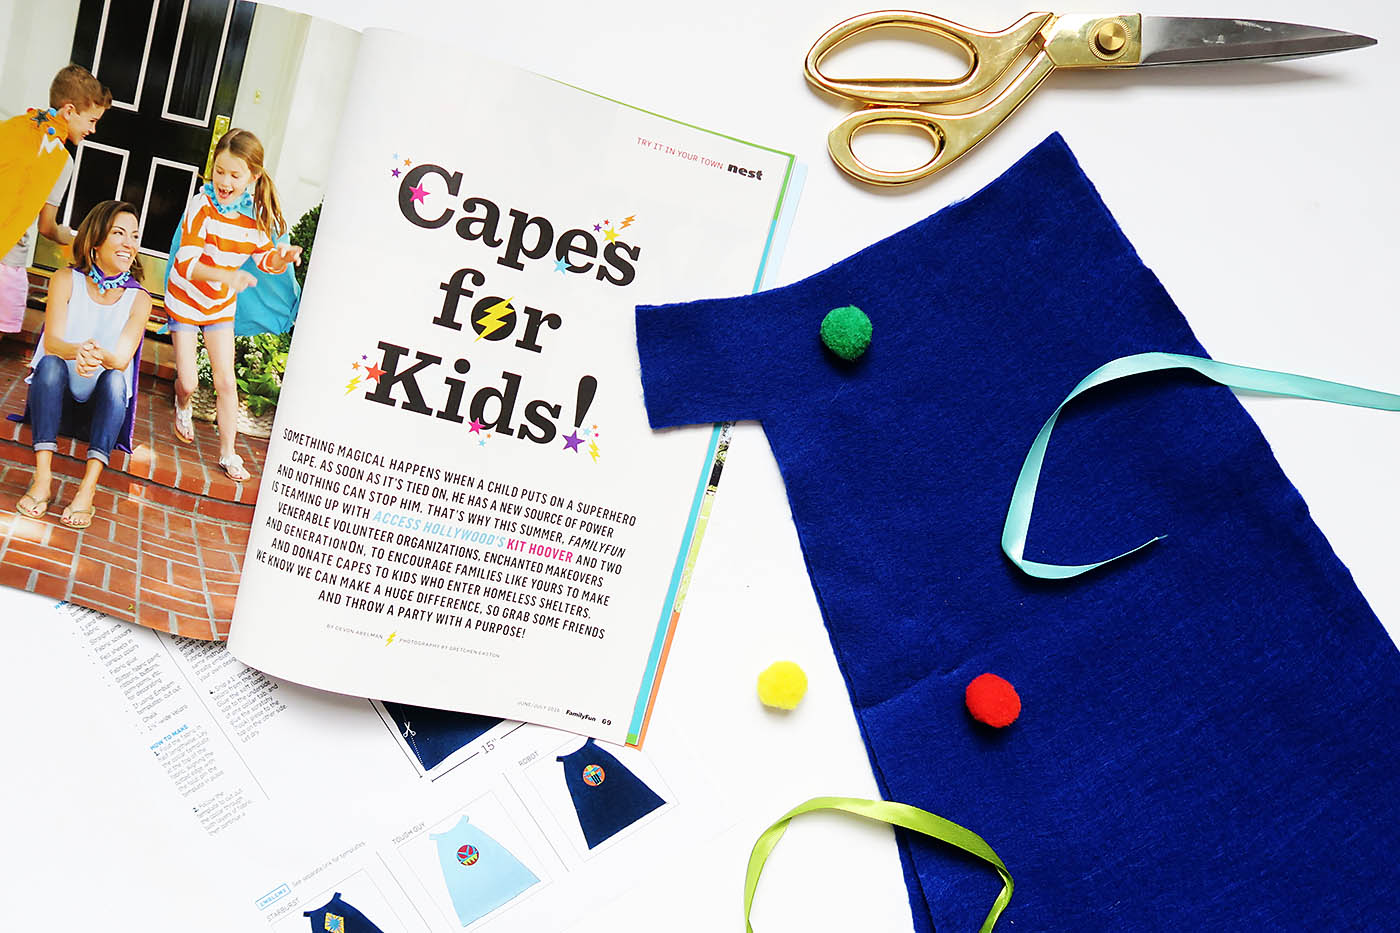 Capes for Kids - a cape making campaign from FamilyFun magazine